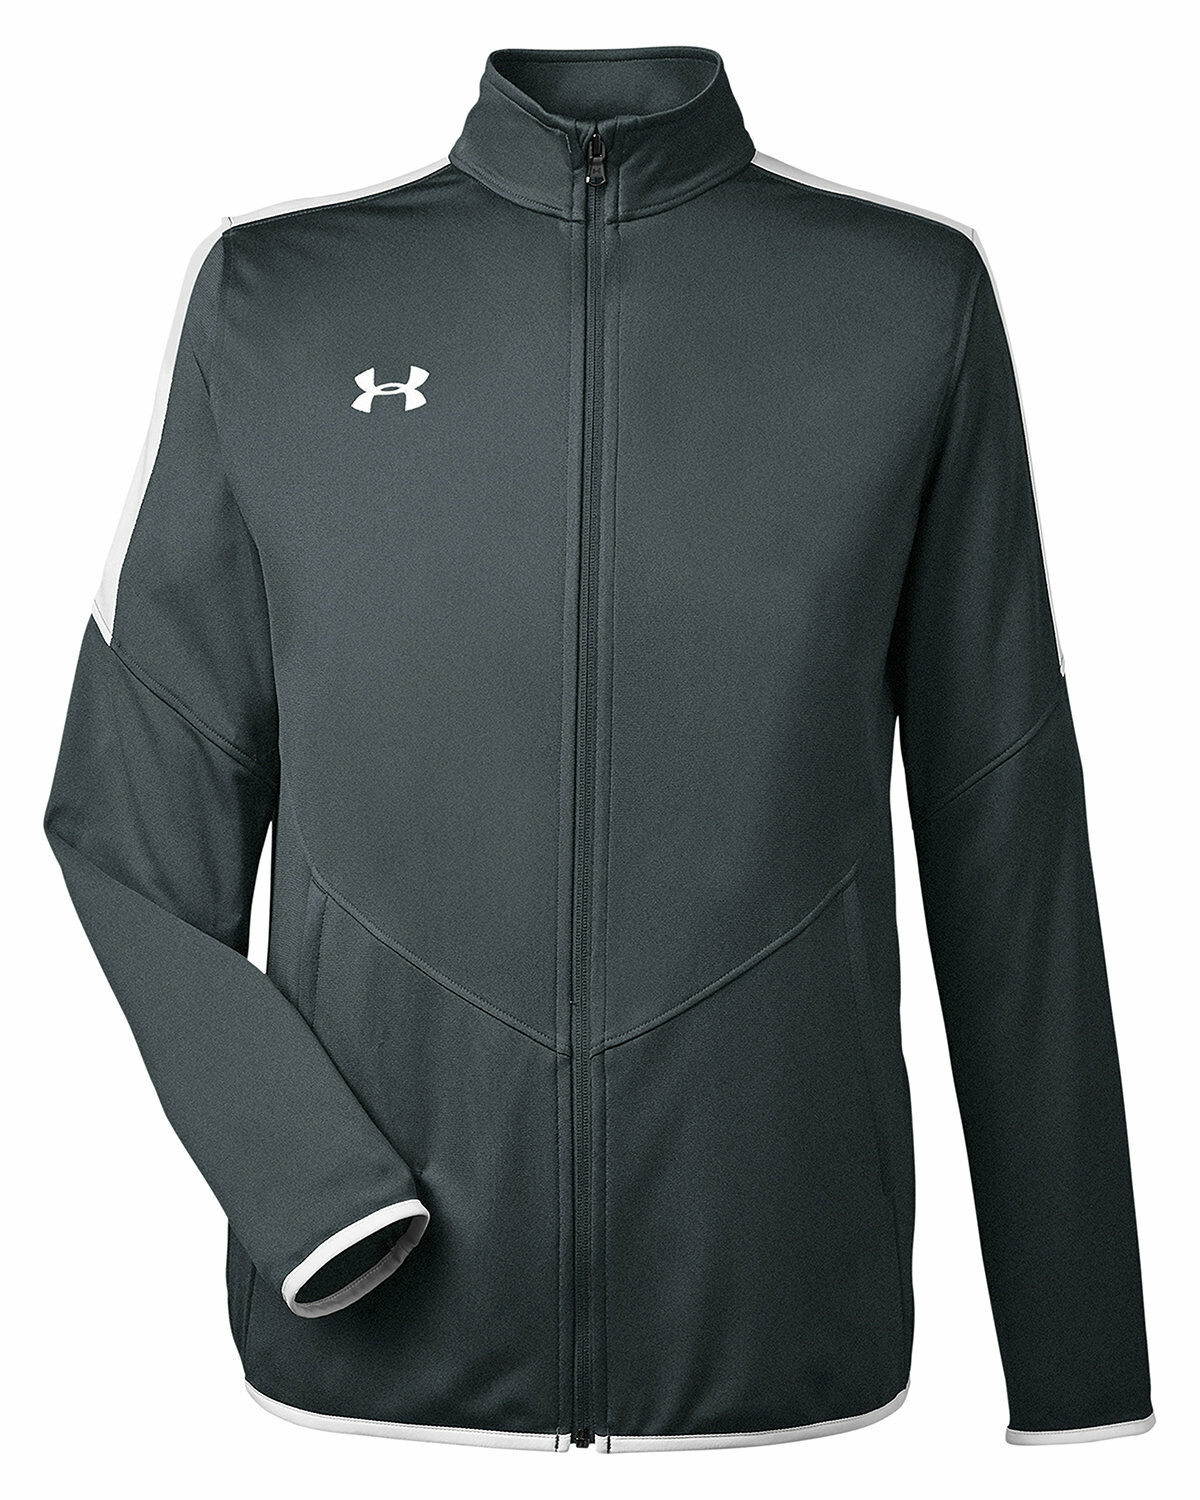 Branded Under Armour Men’s Rival Knit Jacket Stealth Grey